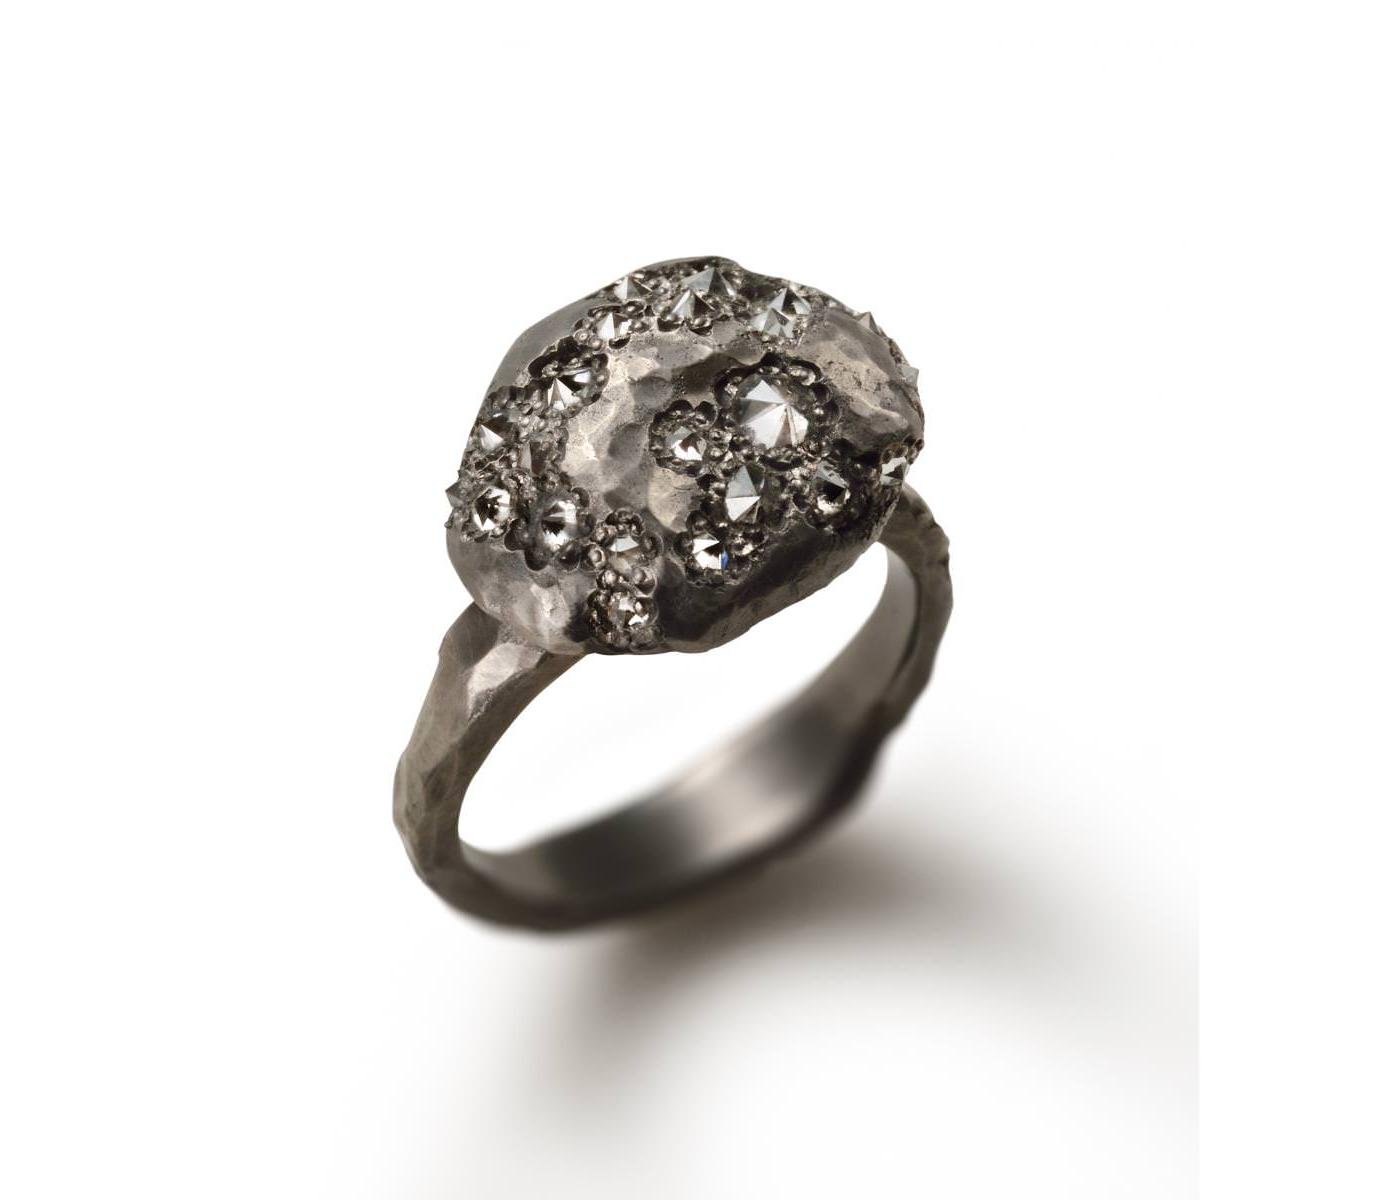 Ring by Tod Pownell